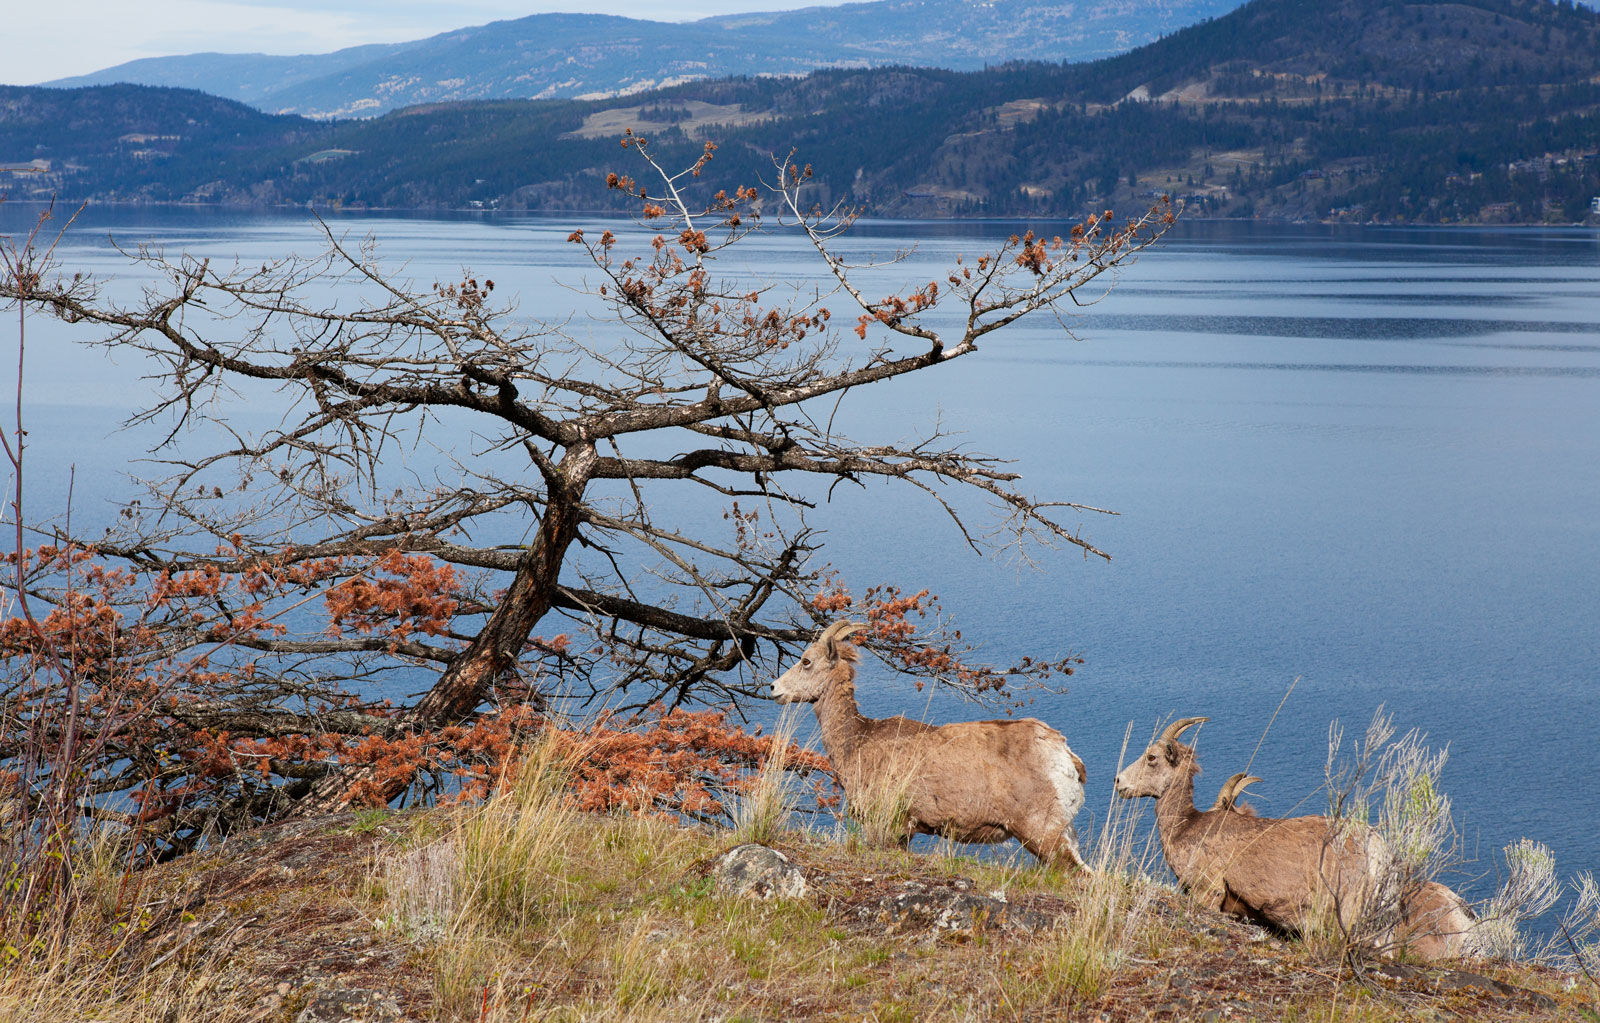 Okanagan Mountain Goats are among the vast wildlife you might be lucky enough to spot on your trip to the valley!